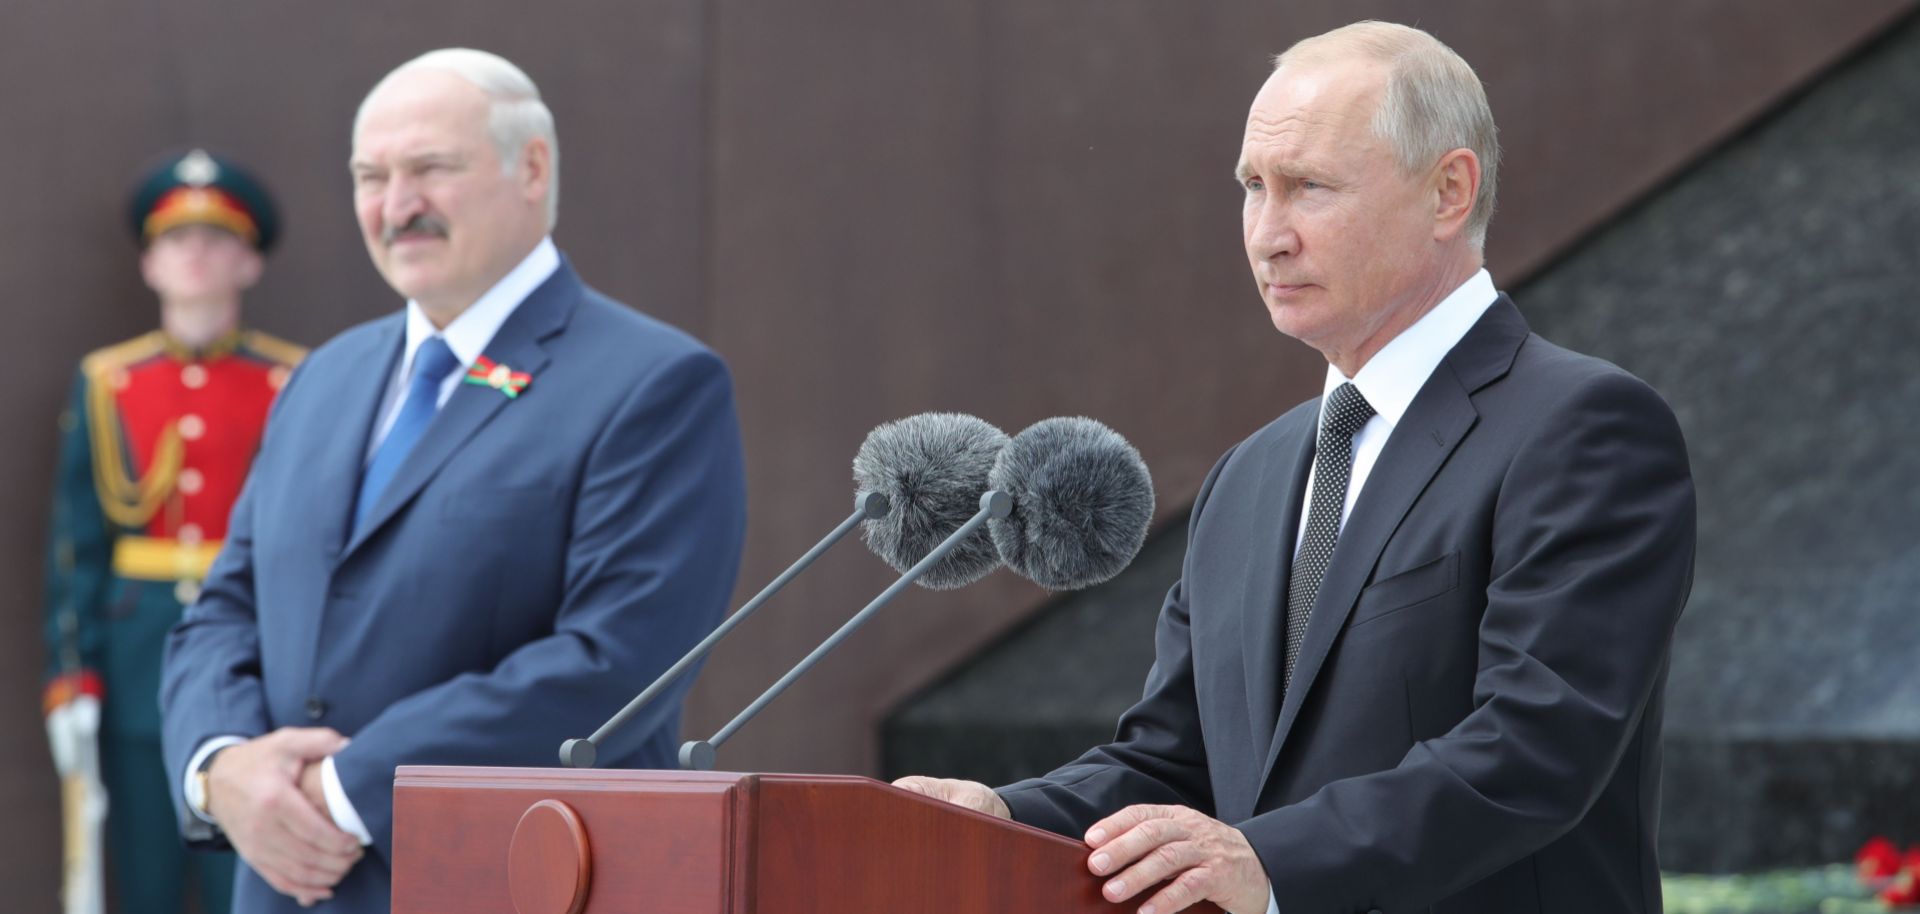 Russian President Vladimir Putin (right) and Belarusian President Alexander Lukashenko (left) take part in a ceremony in Rzhev, Russia, on June 30, 2020. 